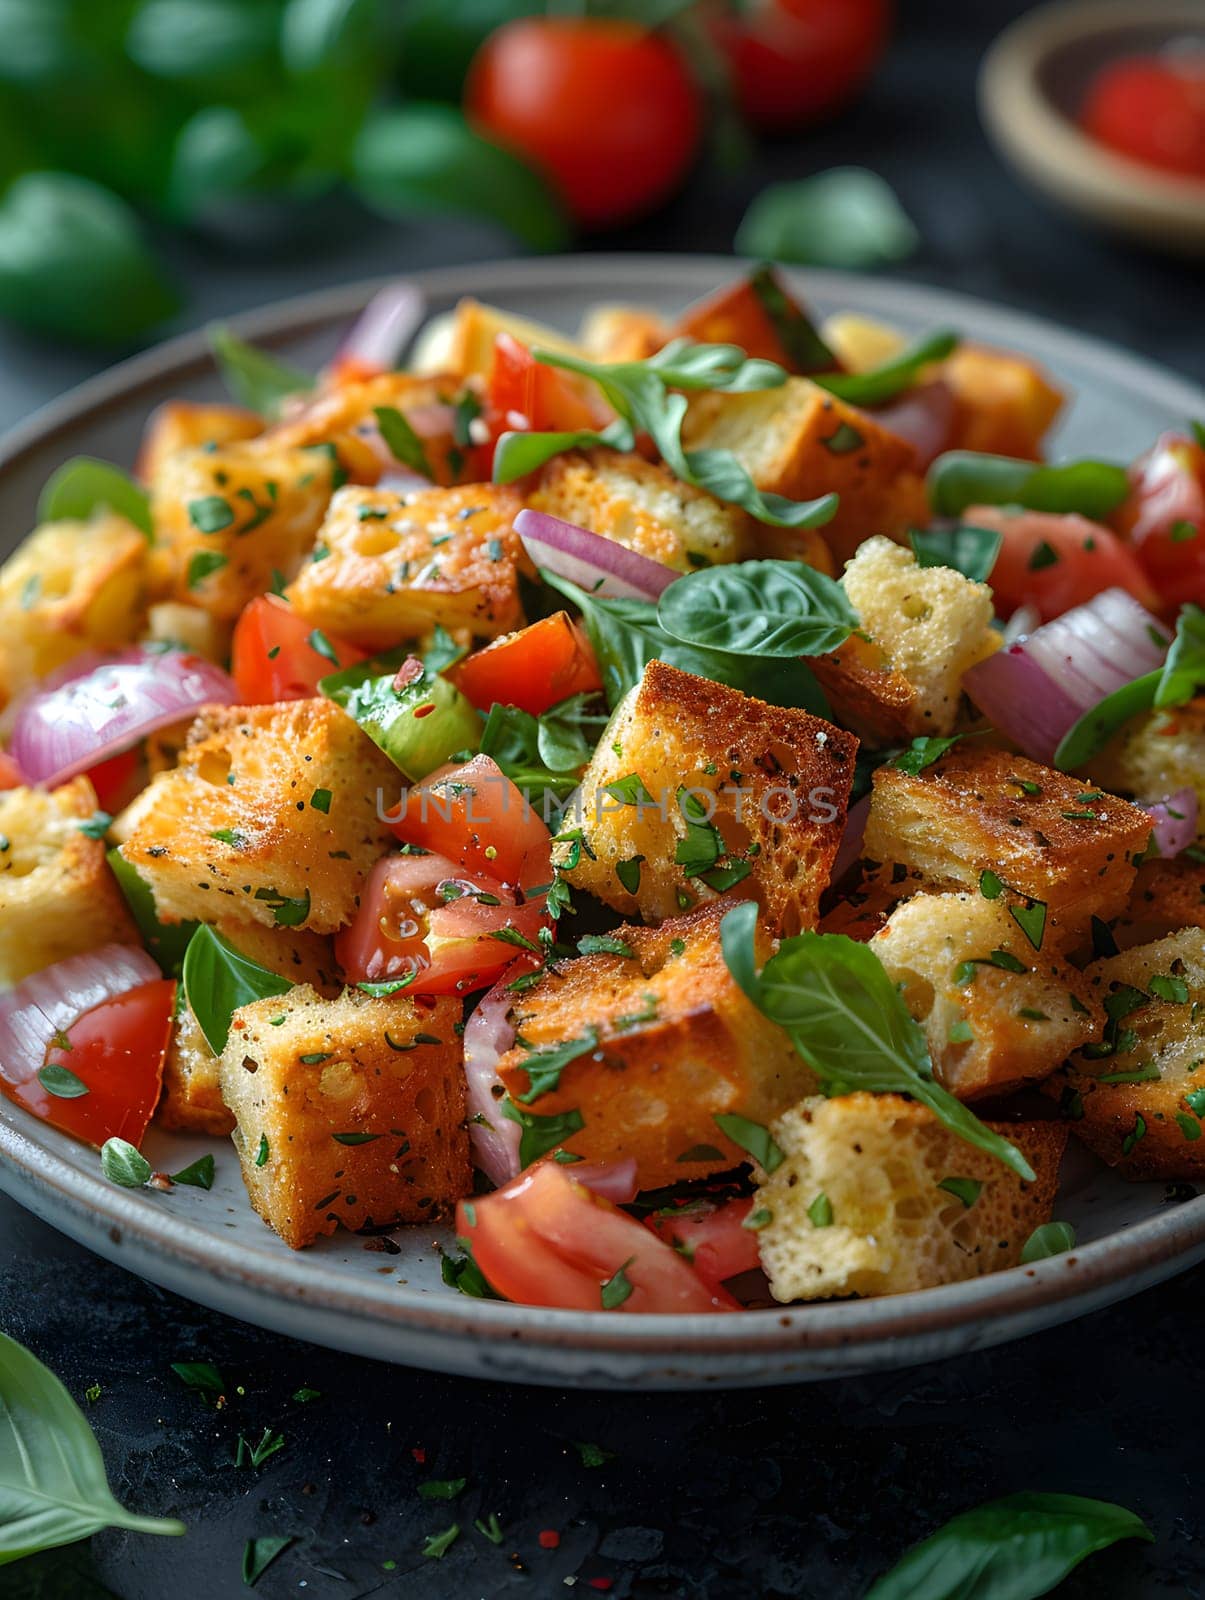 A plate of fresh salad featuring croutons, tomatoes, onions, and basil a delicious and healthy dish packed with flavorful ingredients